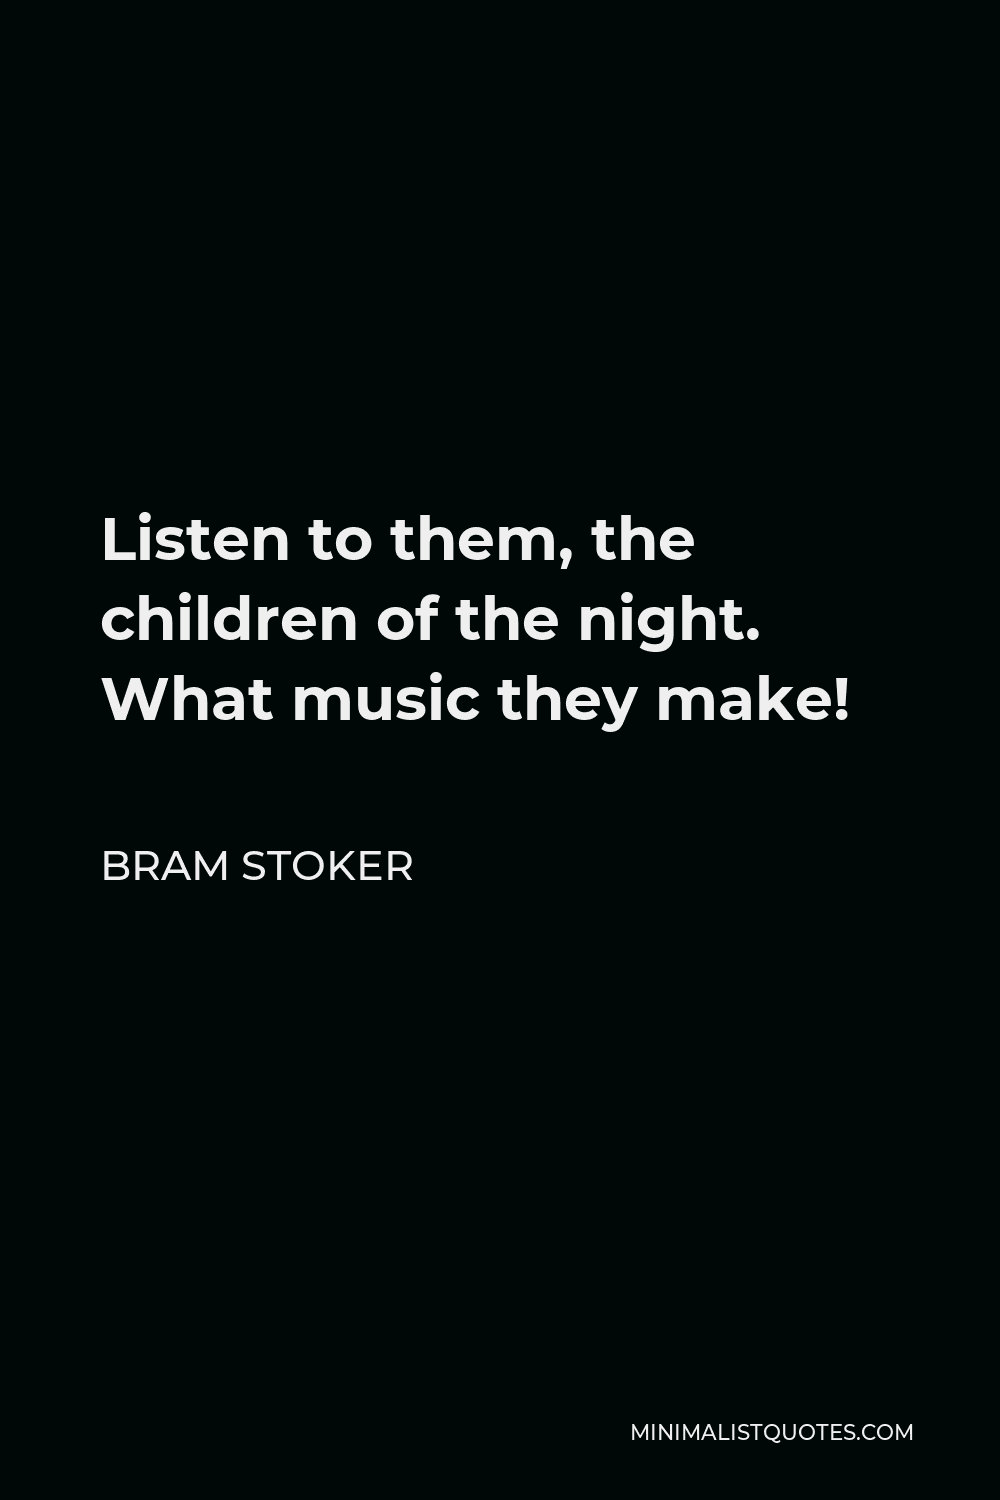 Bram Stoker Quote - Listen to them, the children of the night. What music they make!